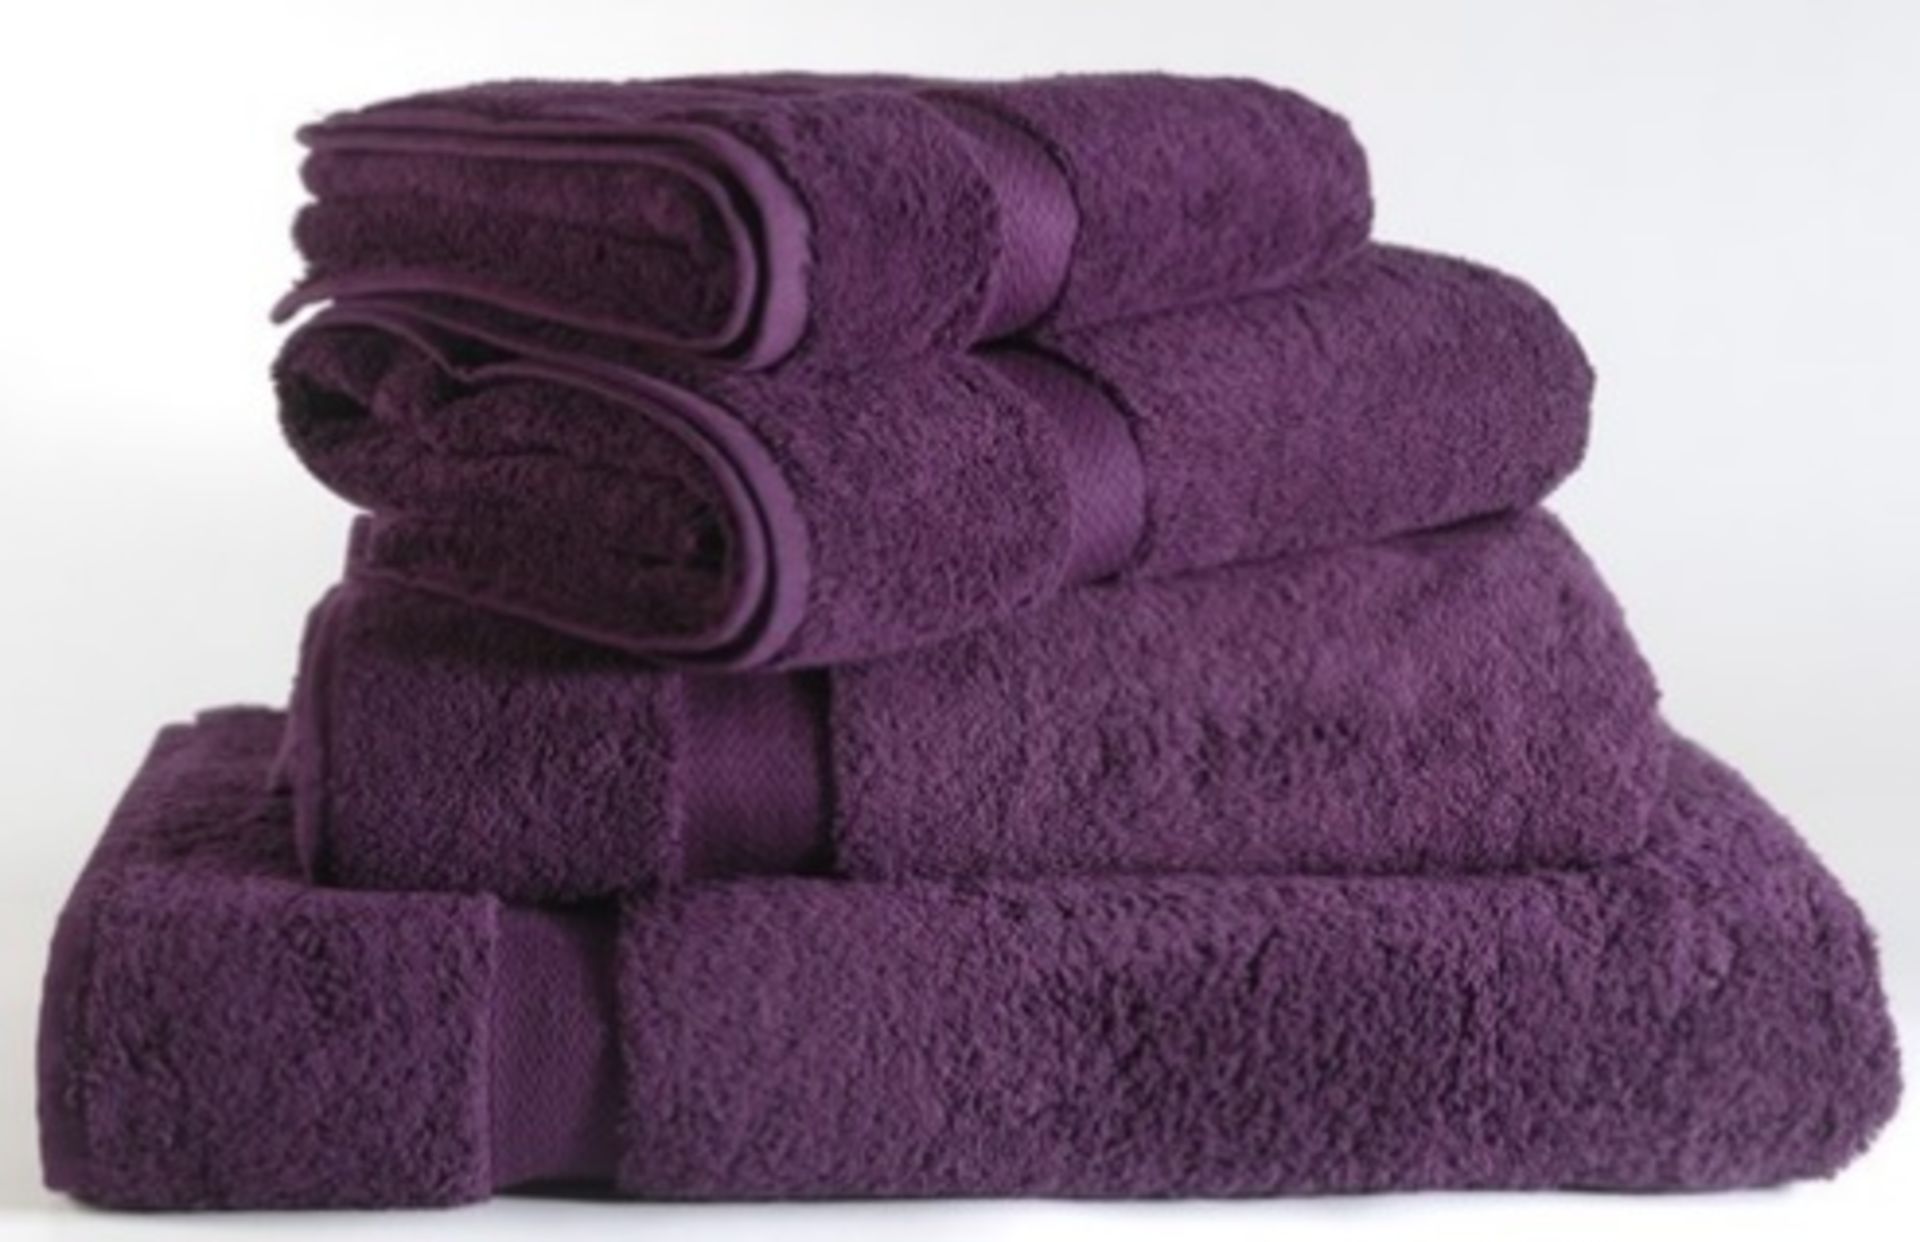 20 x Majestic Luxury 620gsm Bath Towels in Purple - Size LARGE - RRP £340 - CL587 - Location: Altrin